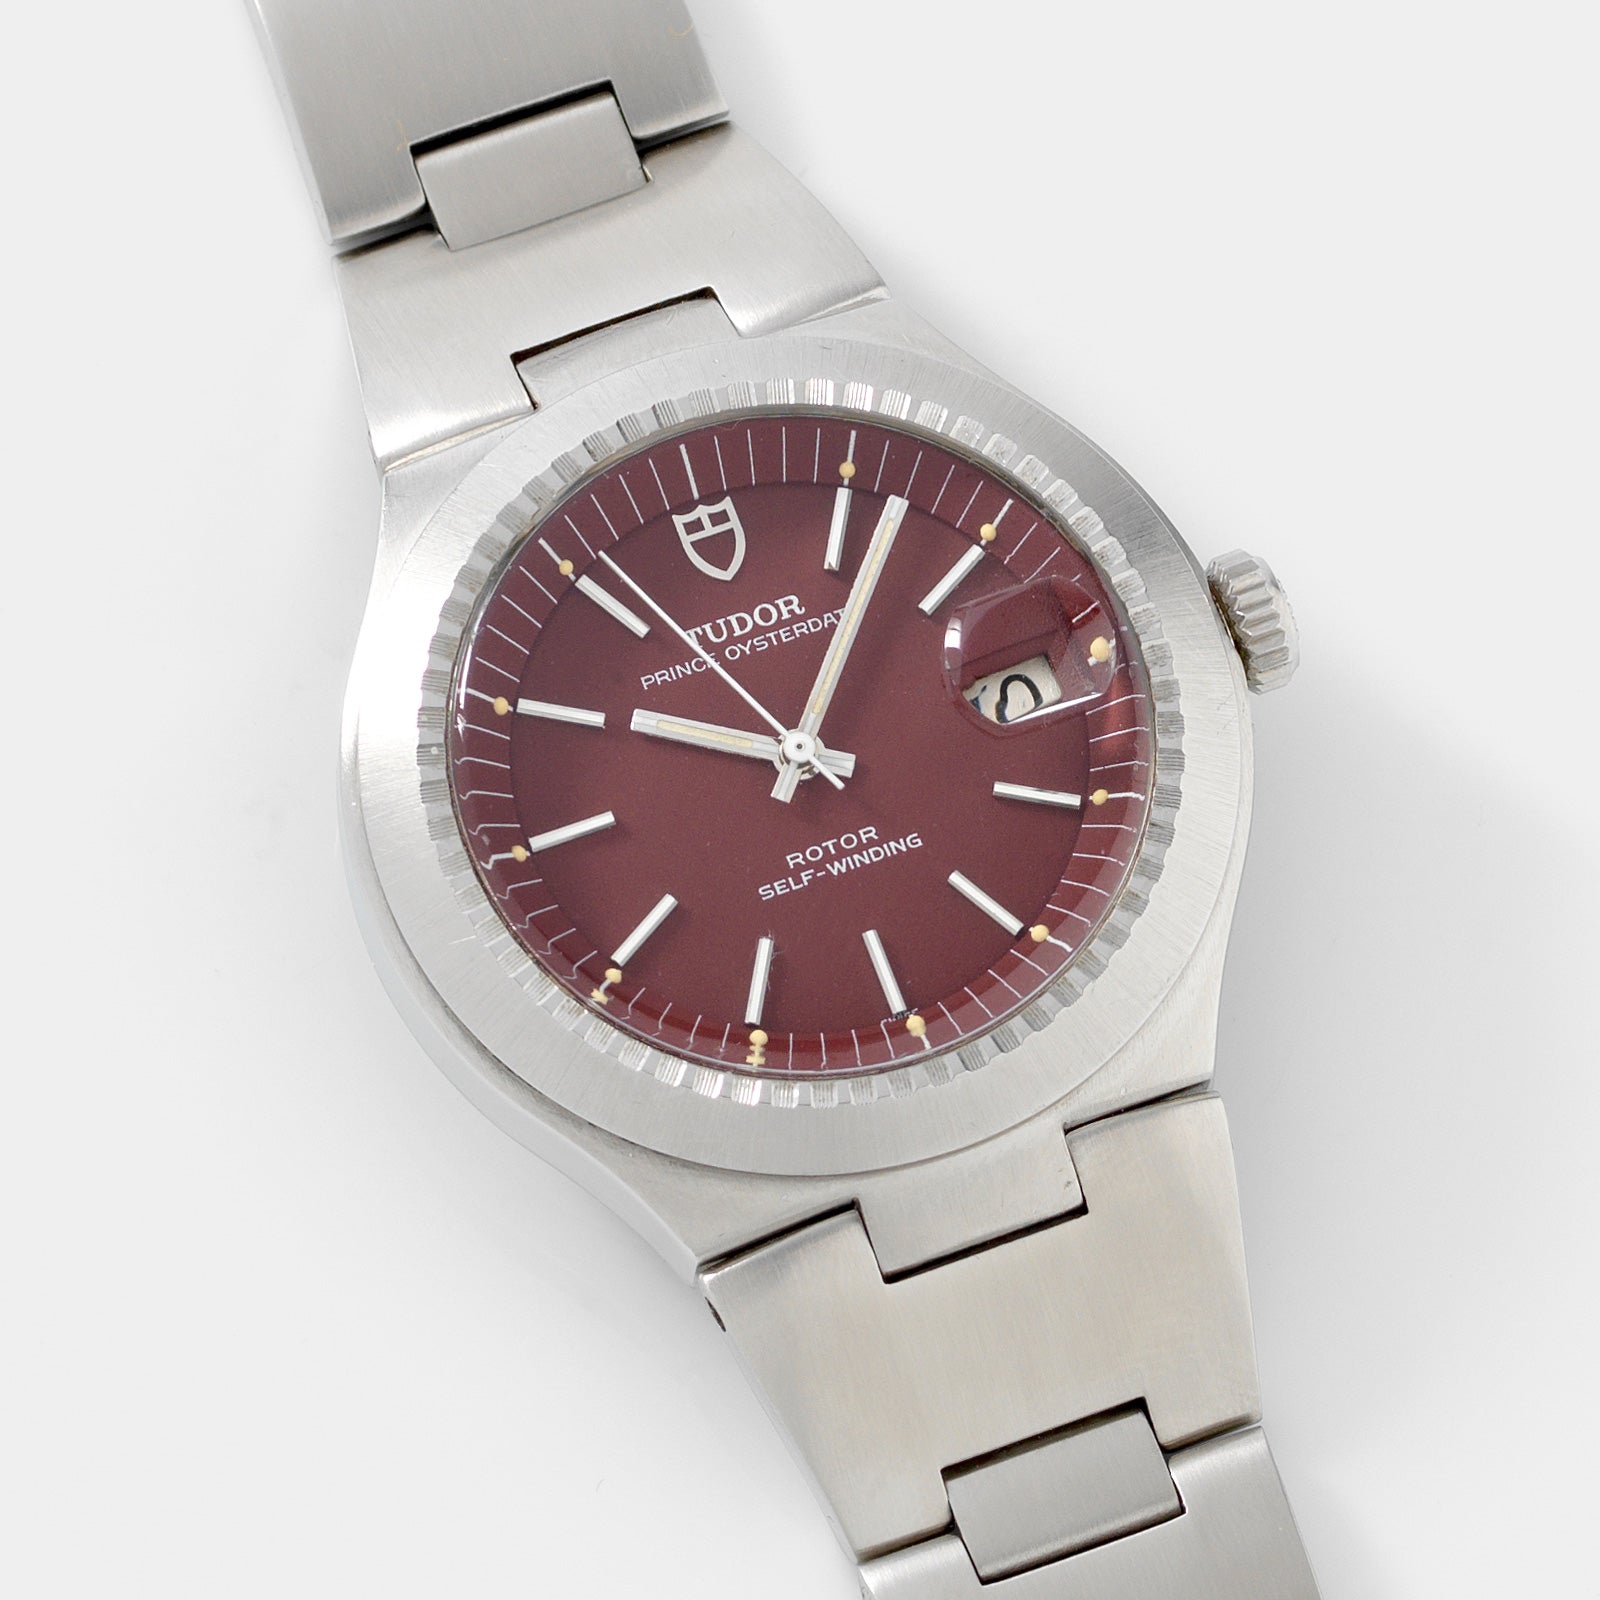 Tudor Prince Oysterdate 9121/0 Burgundy Dial With Papers